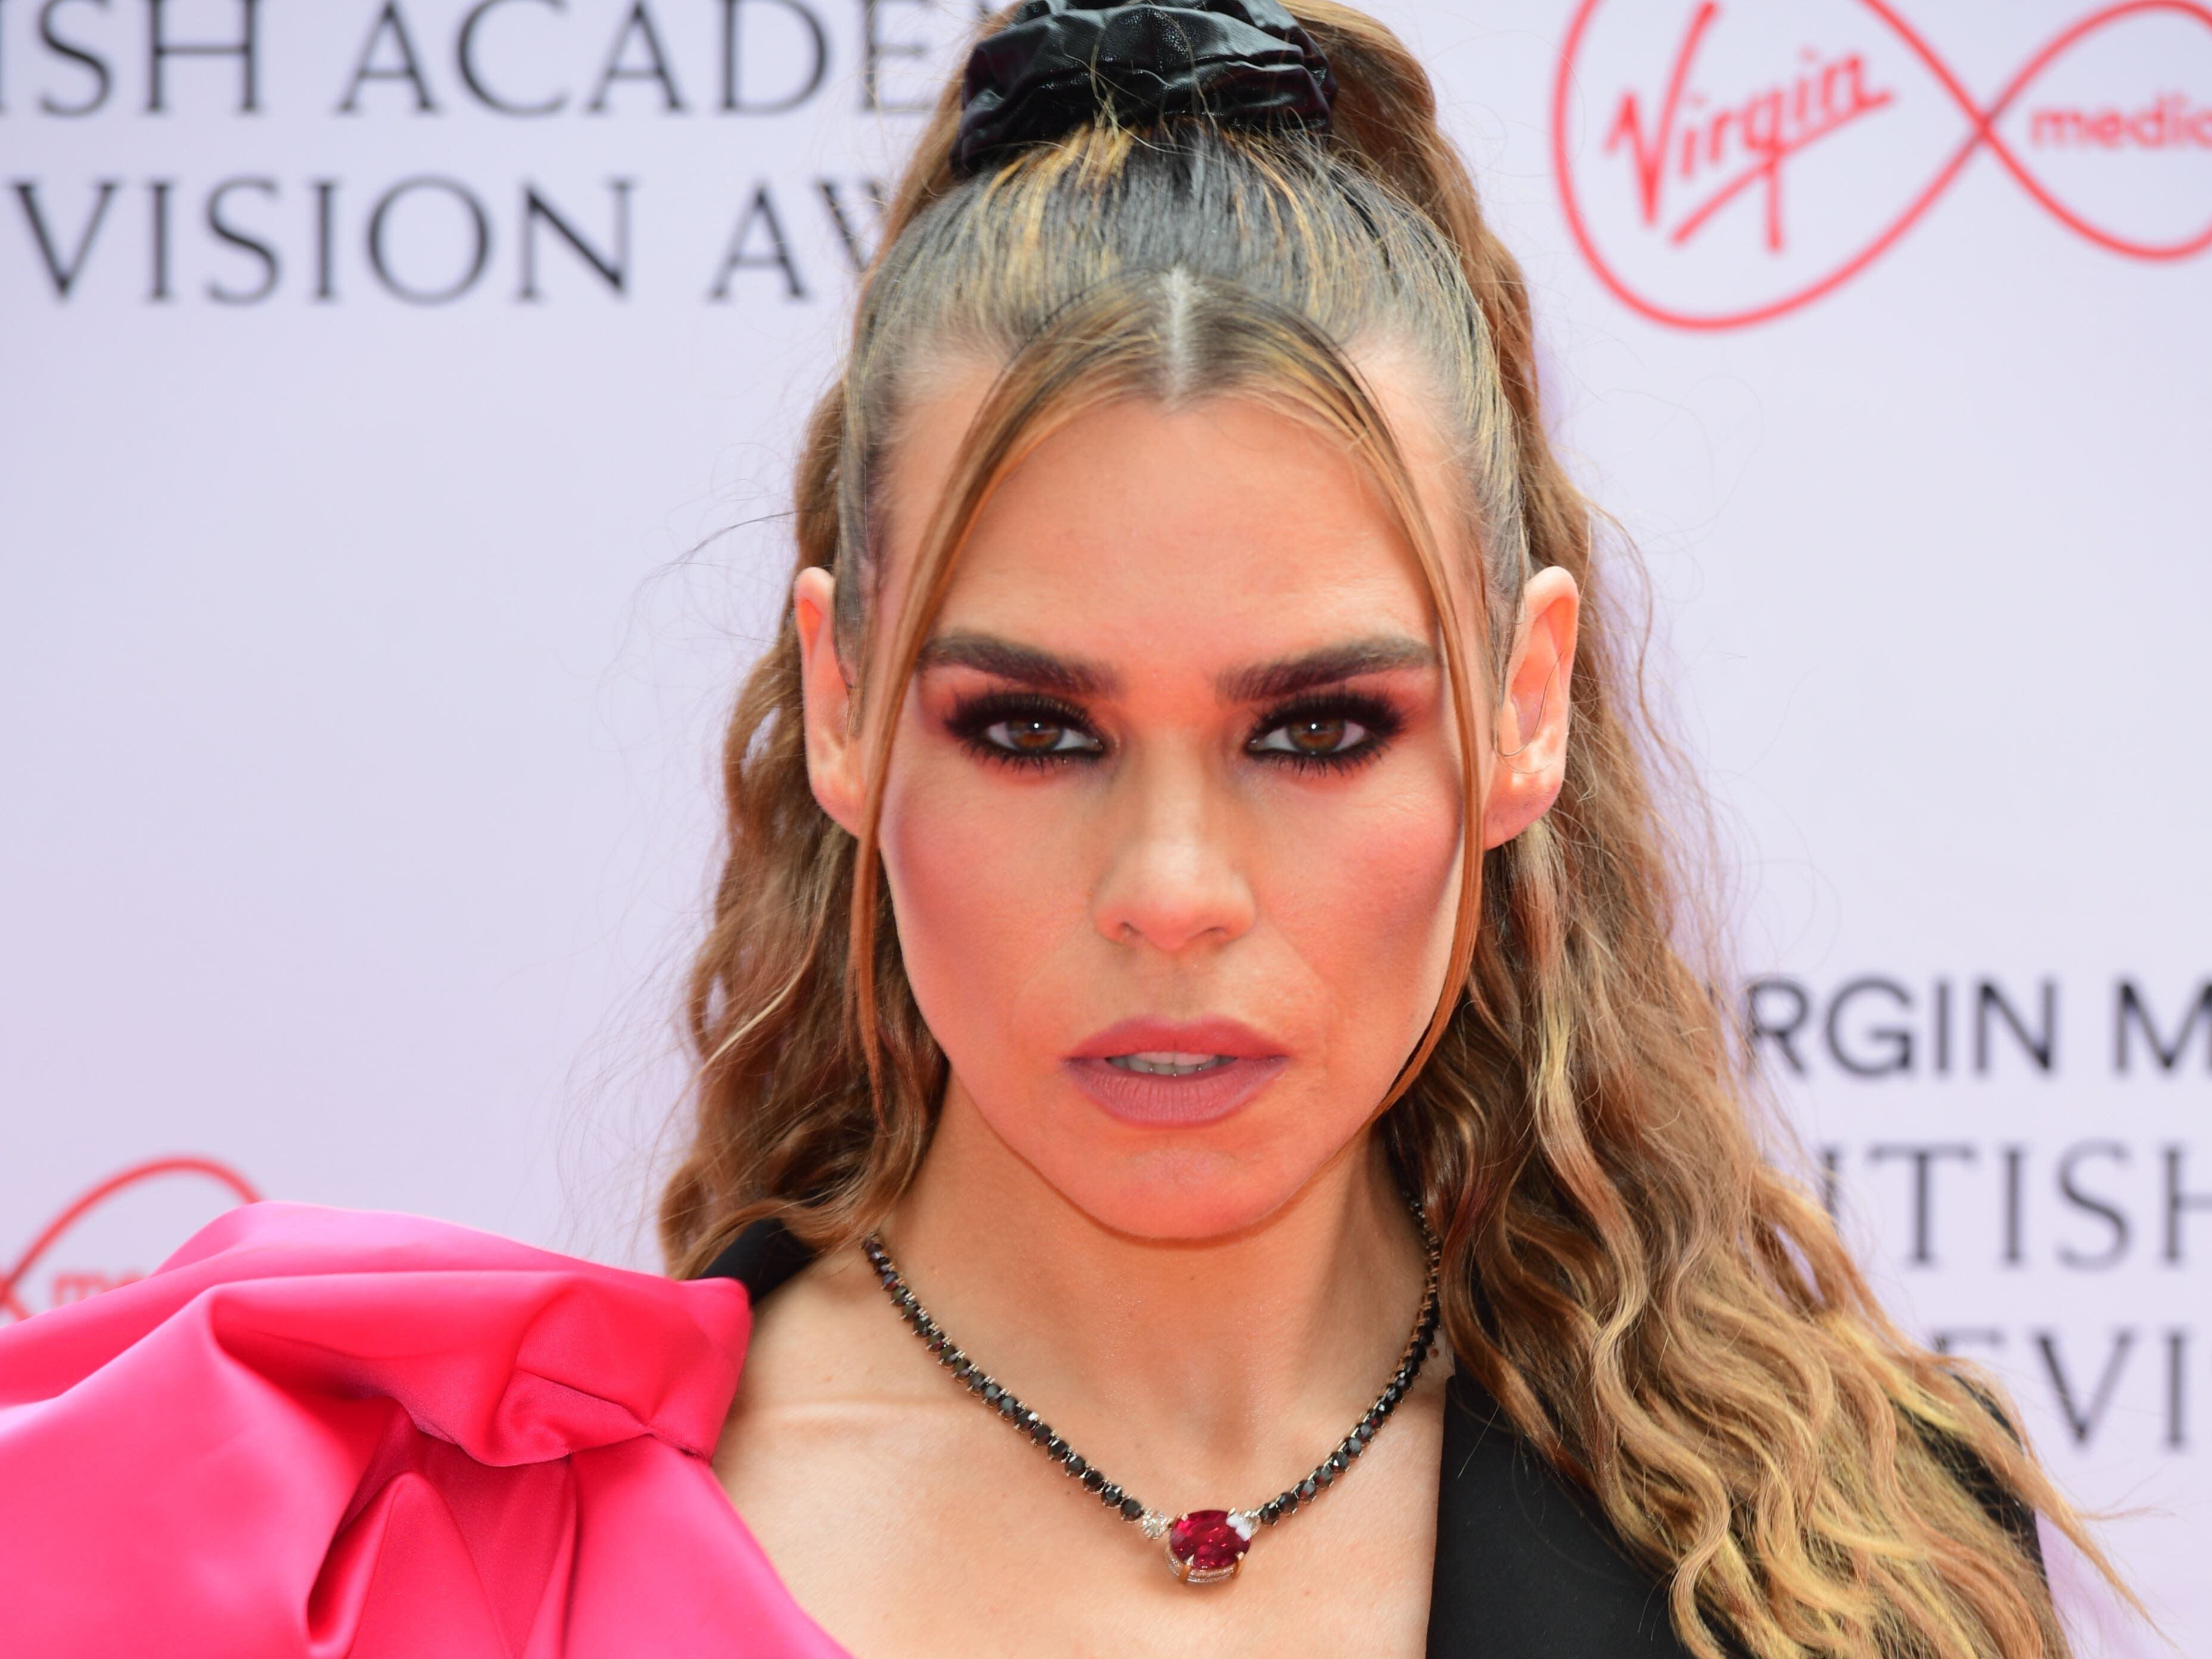 Billie Piper says she smoked cigarettes with the Spice Girls aged 15